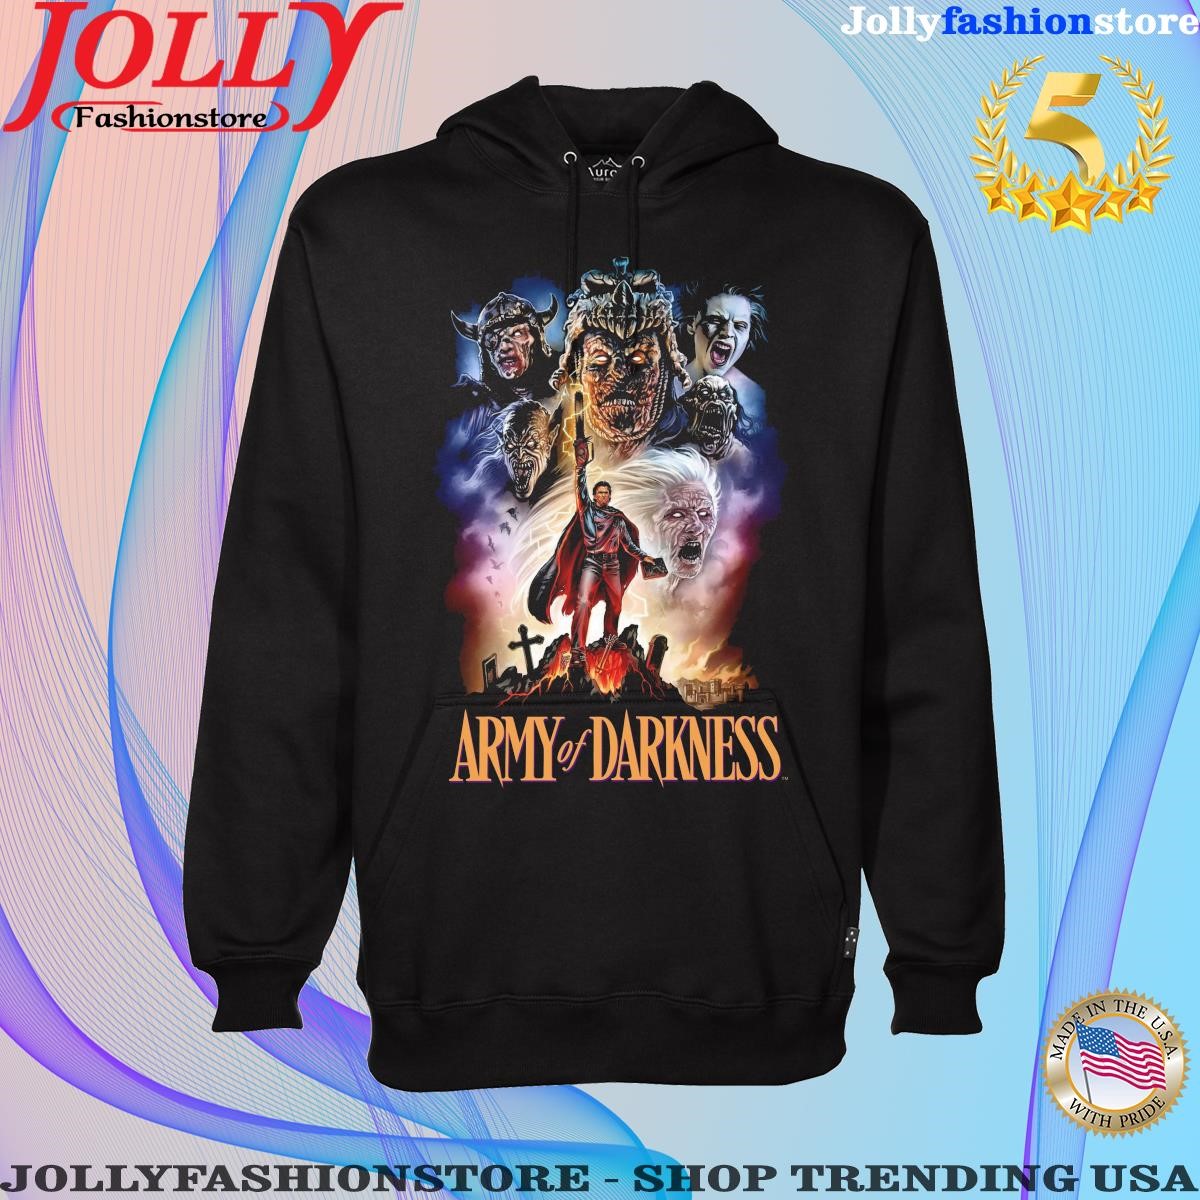 Long live the king army of darkness shirt Hoodie shirt.png